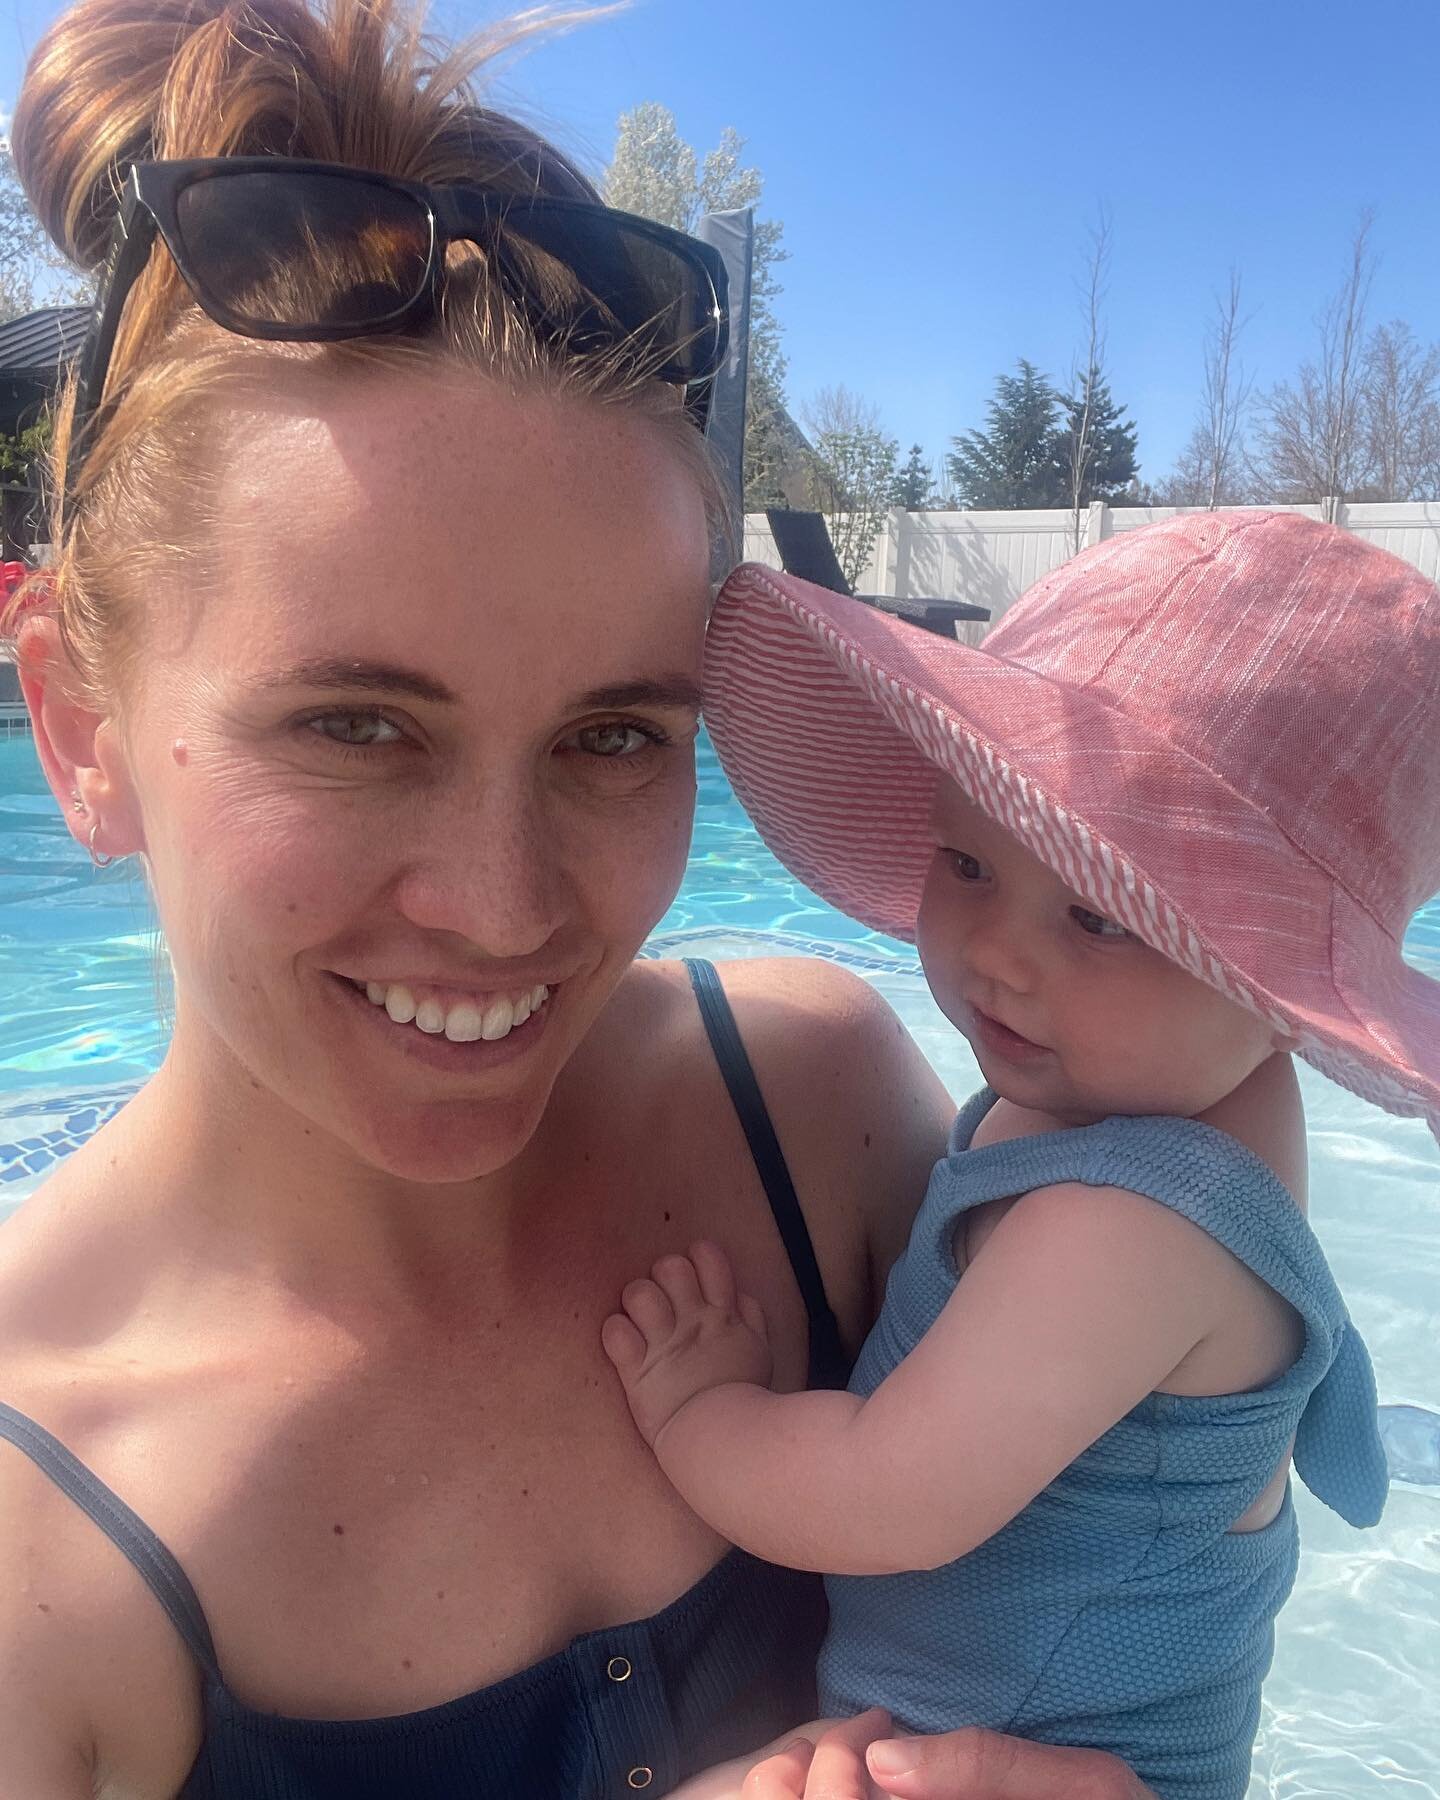 Lately. 🤍

Had our first swim of the year and little miss' first ever in papa's pool. She loved it as long as I was holding onto her. 

We celebrated Sawyers 2nd birthday with his favorite things, mac and cheese for breakfast, the zoo and swimming. 